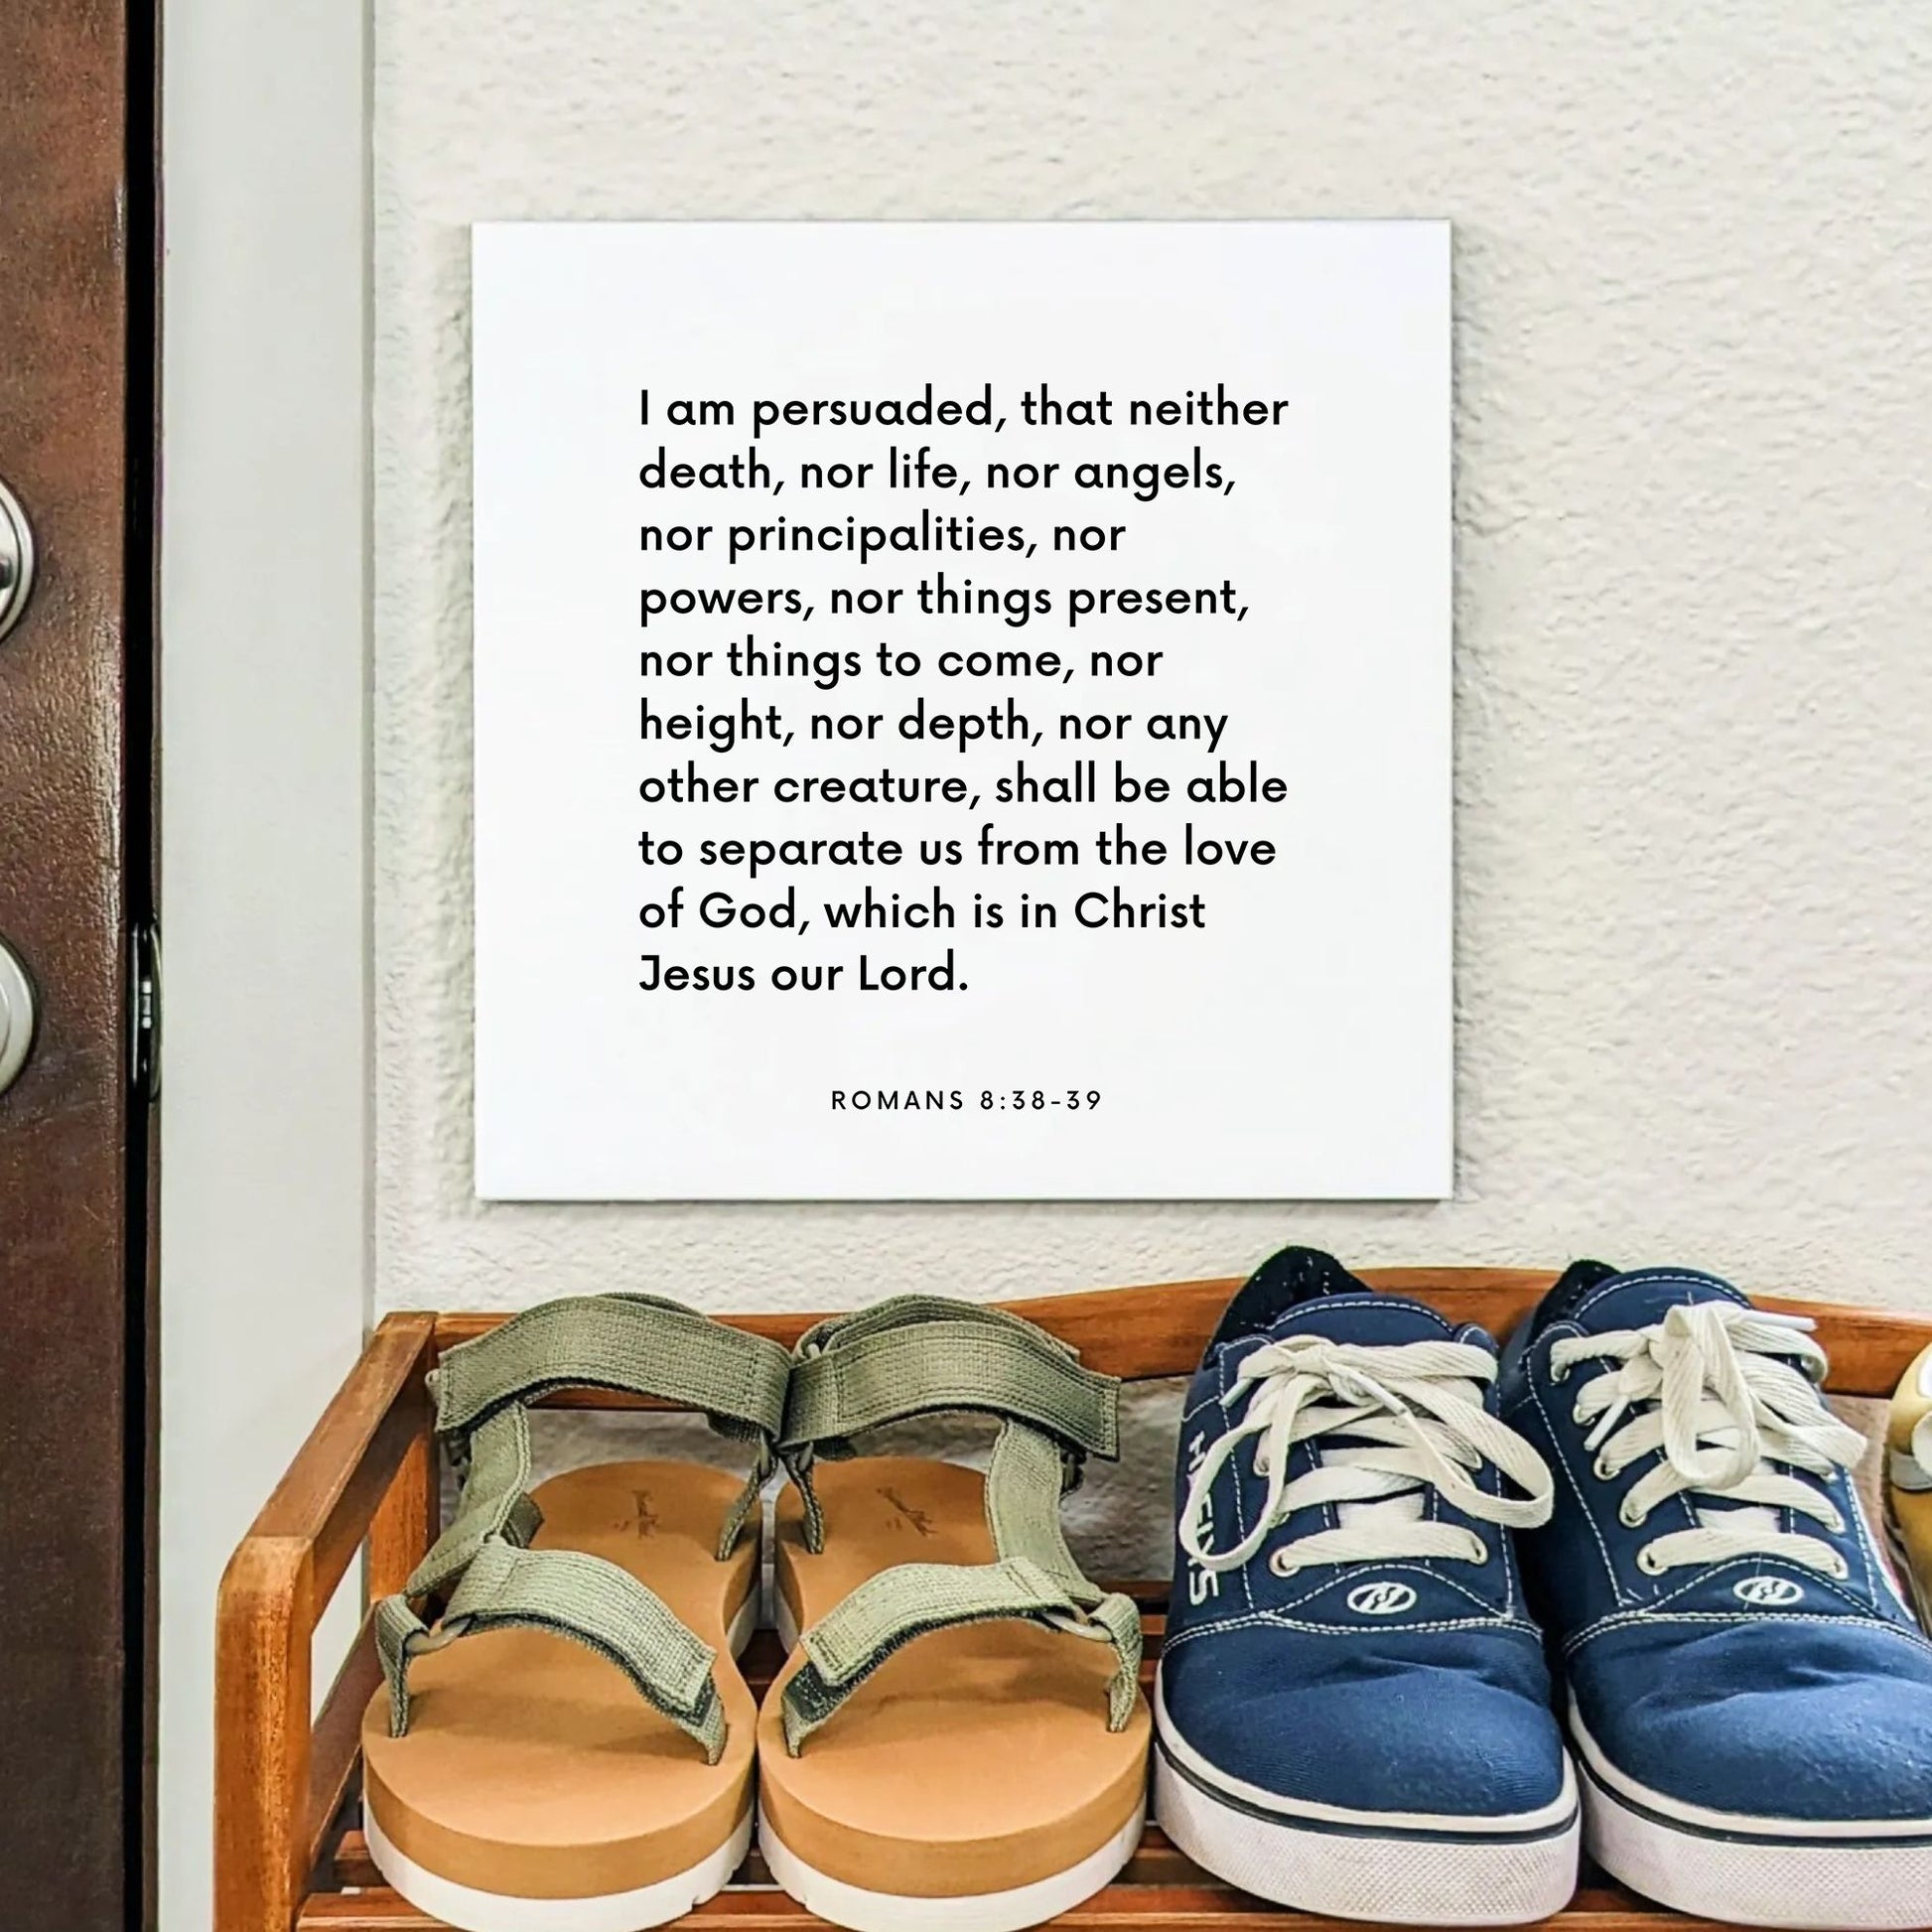 Shoes mouting of the scripture tile for Romans 8:38-39 - "The love of God, which is in Christ Jesus"